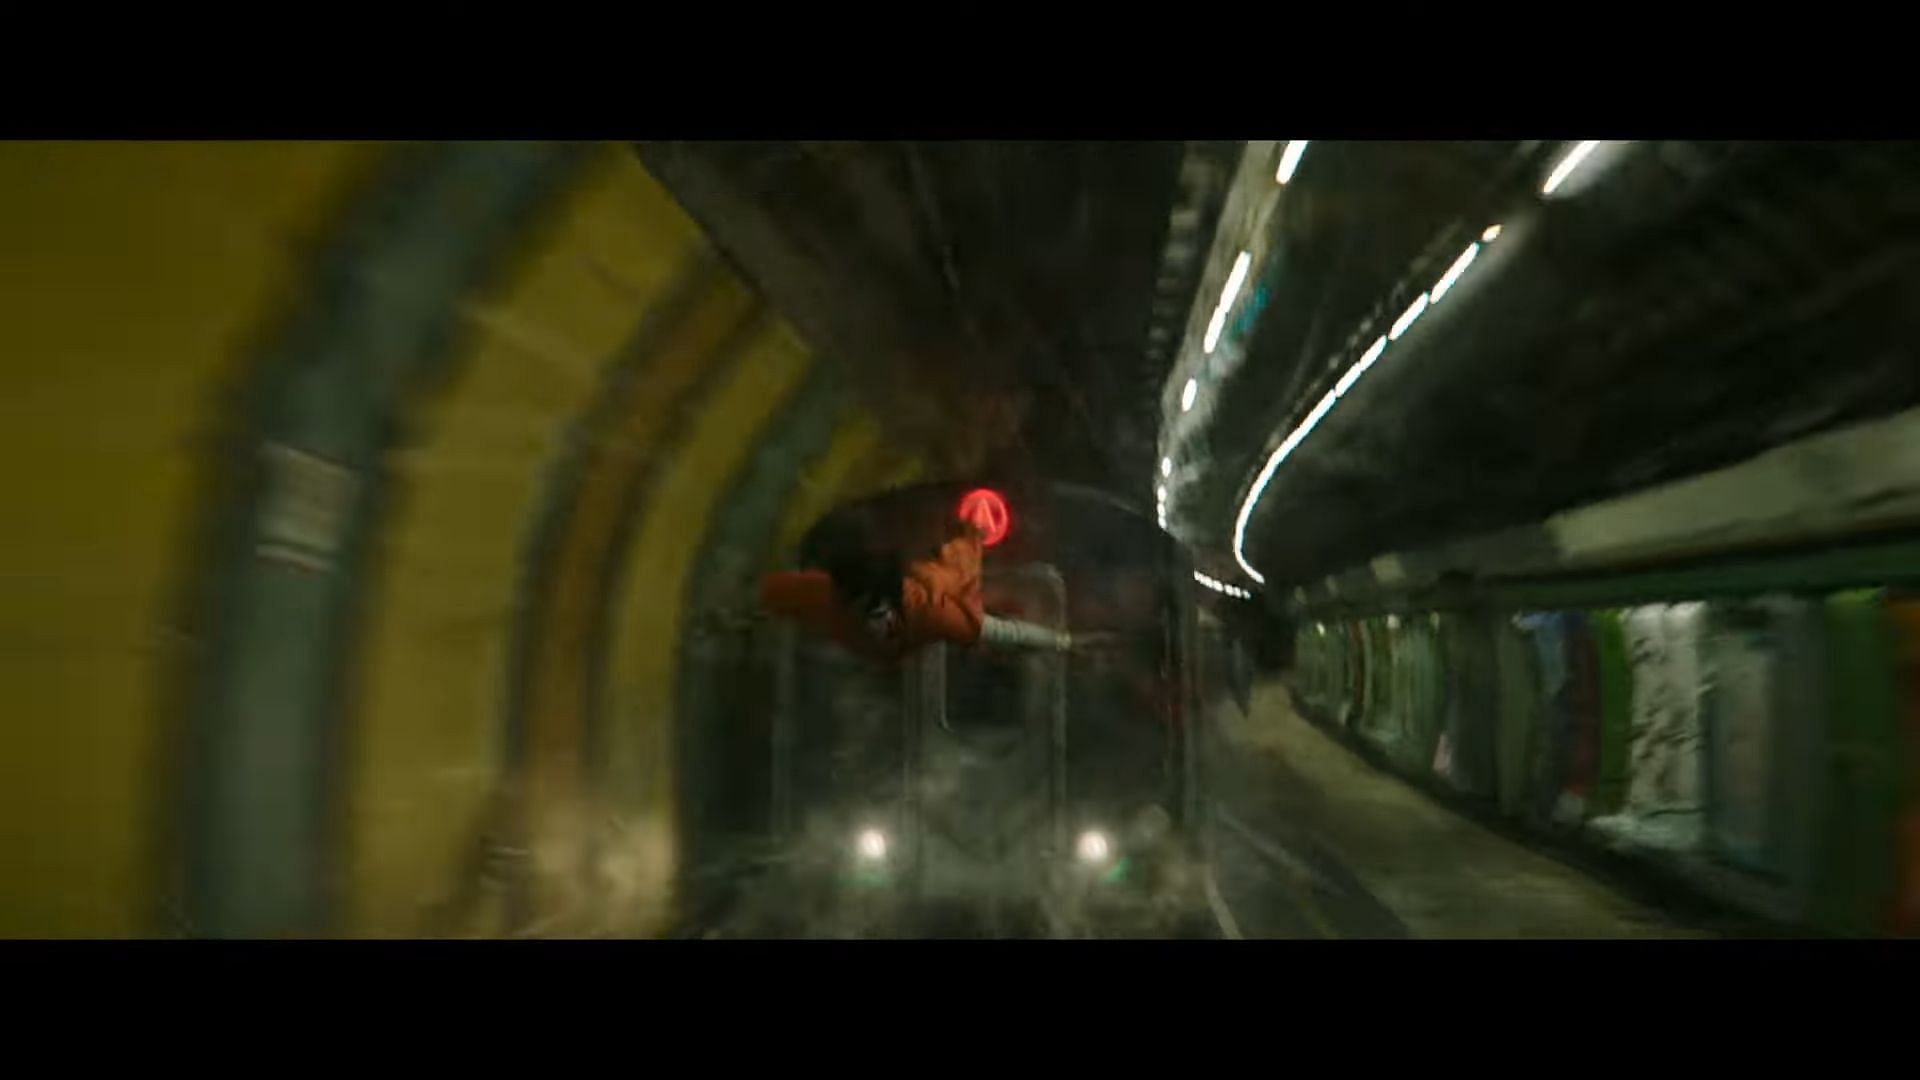 Morbius gliding in a subway tunnel in the trailer (Image via Sony Pictures Entertainment/ Marvel)